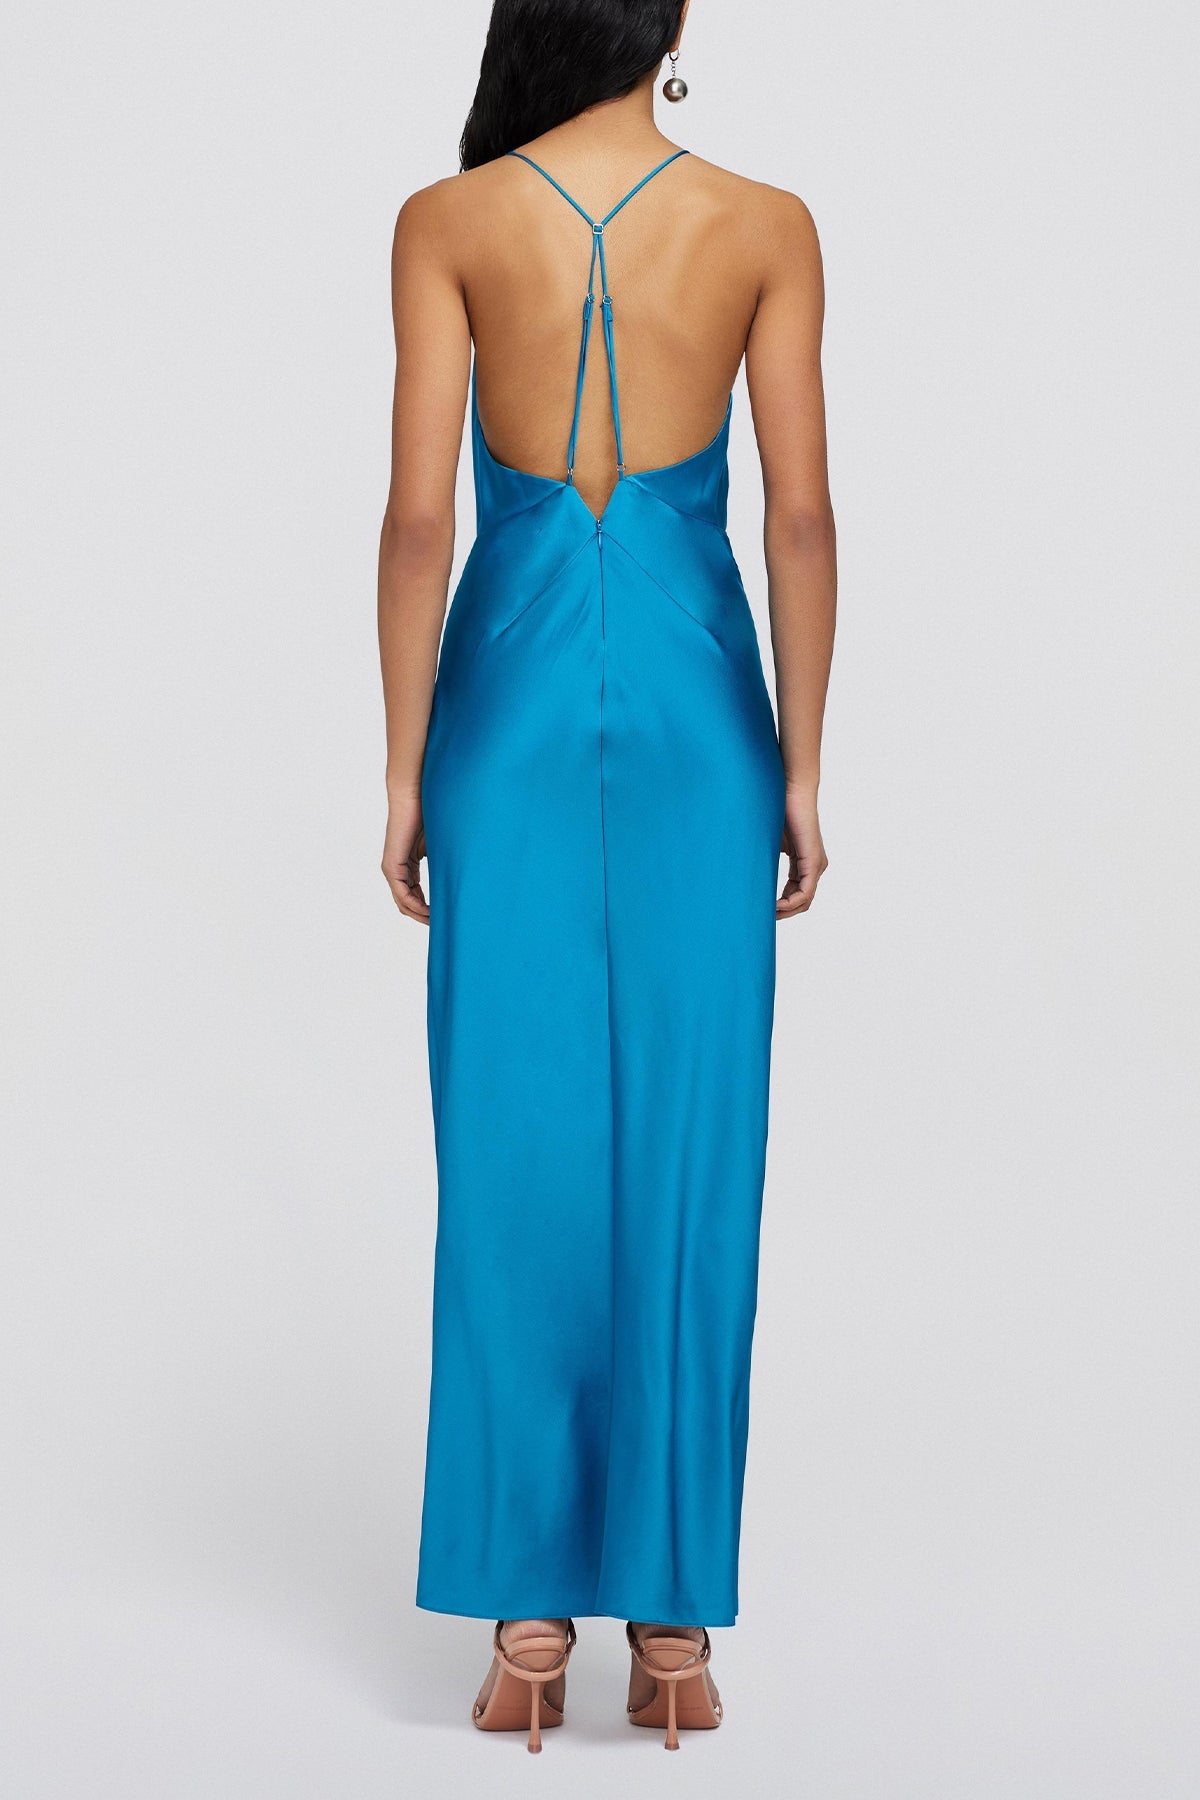 Giana Front Drape Gown in Phthalo Blue - shop-olivia.com